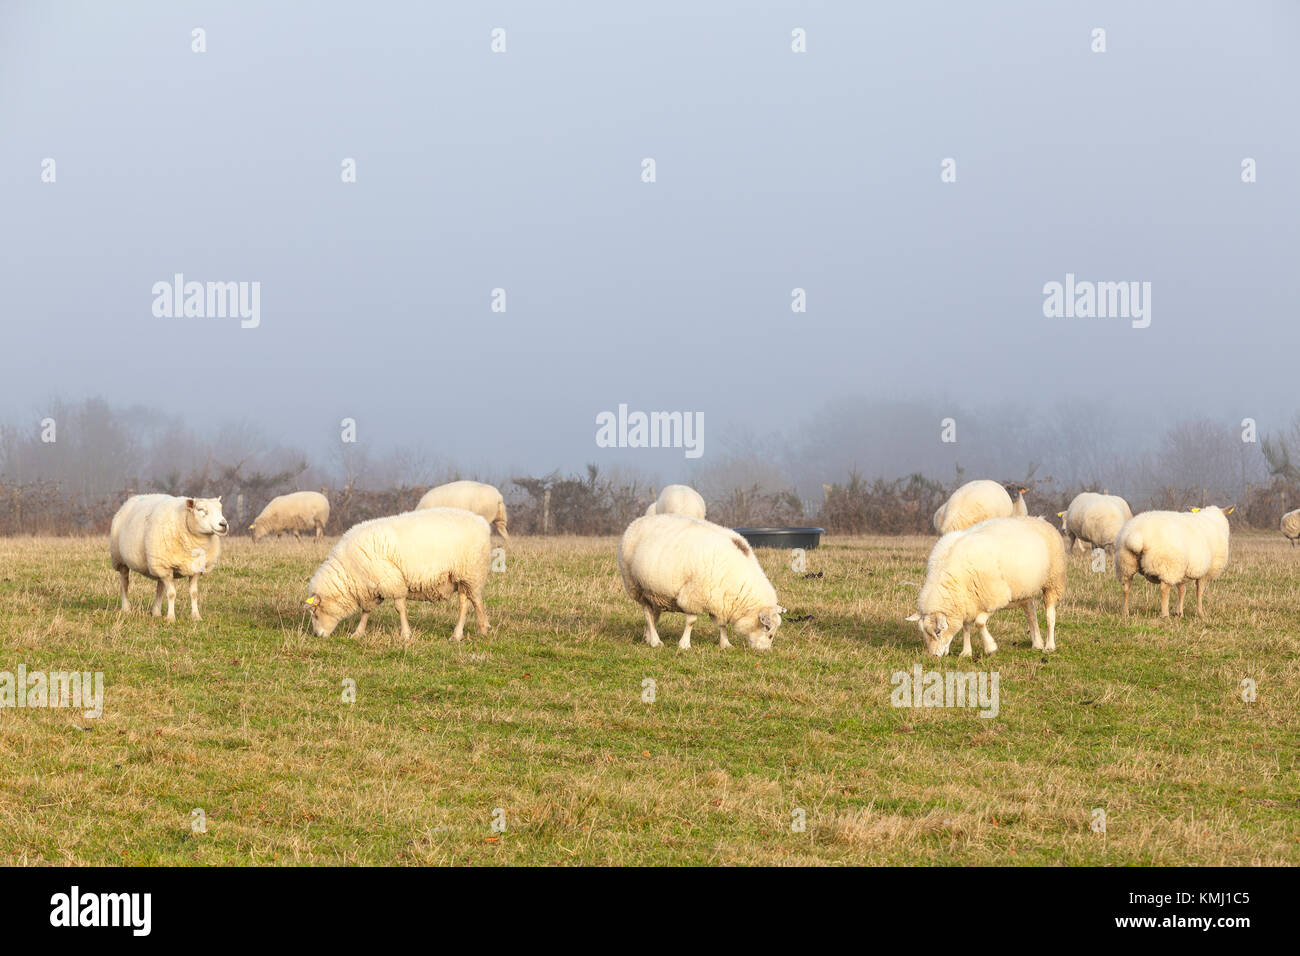 Flock of sheep with heavy woolly fleece grazing at sunset in a field as a winter storm rolls in with thick mist  beind them Stock Photo